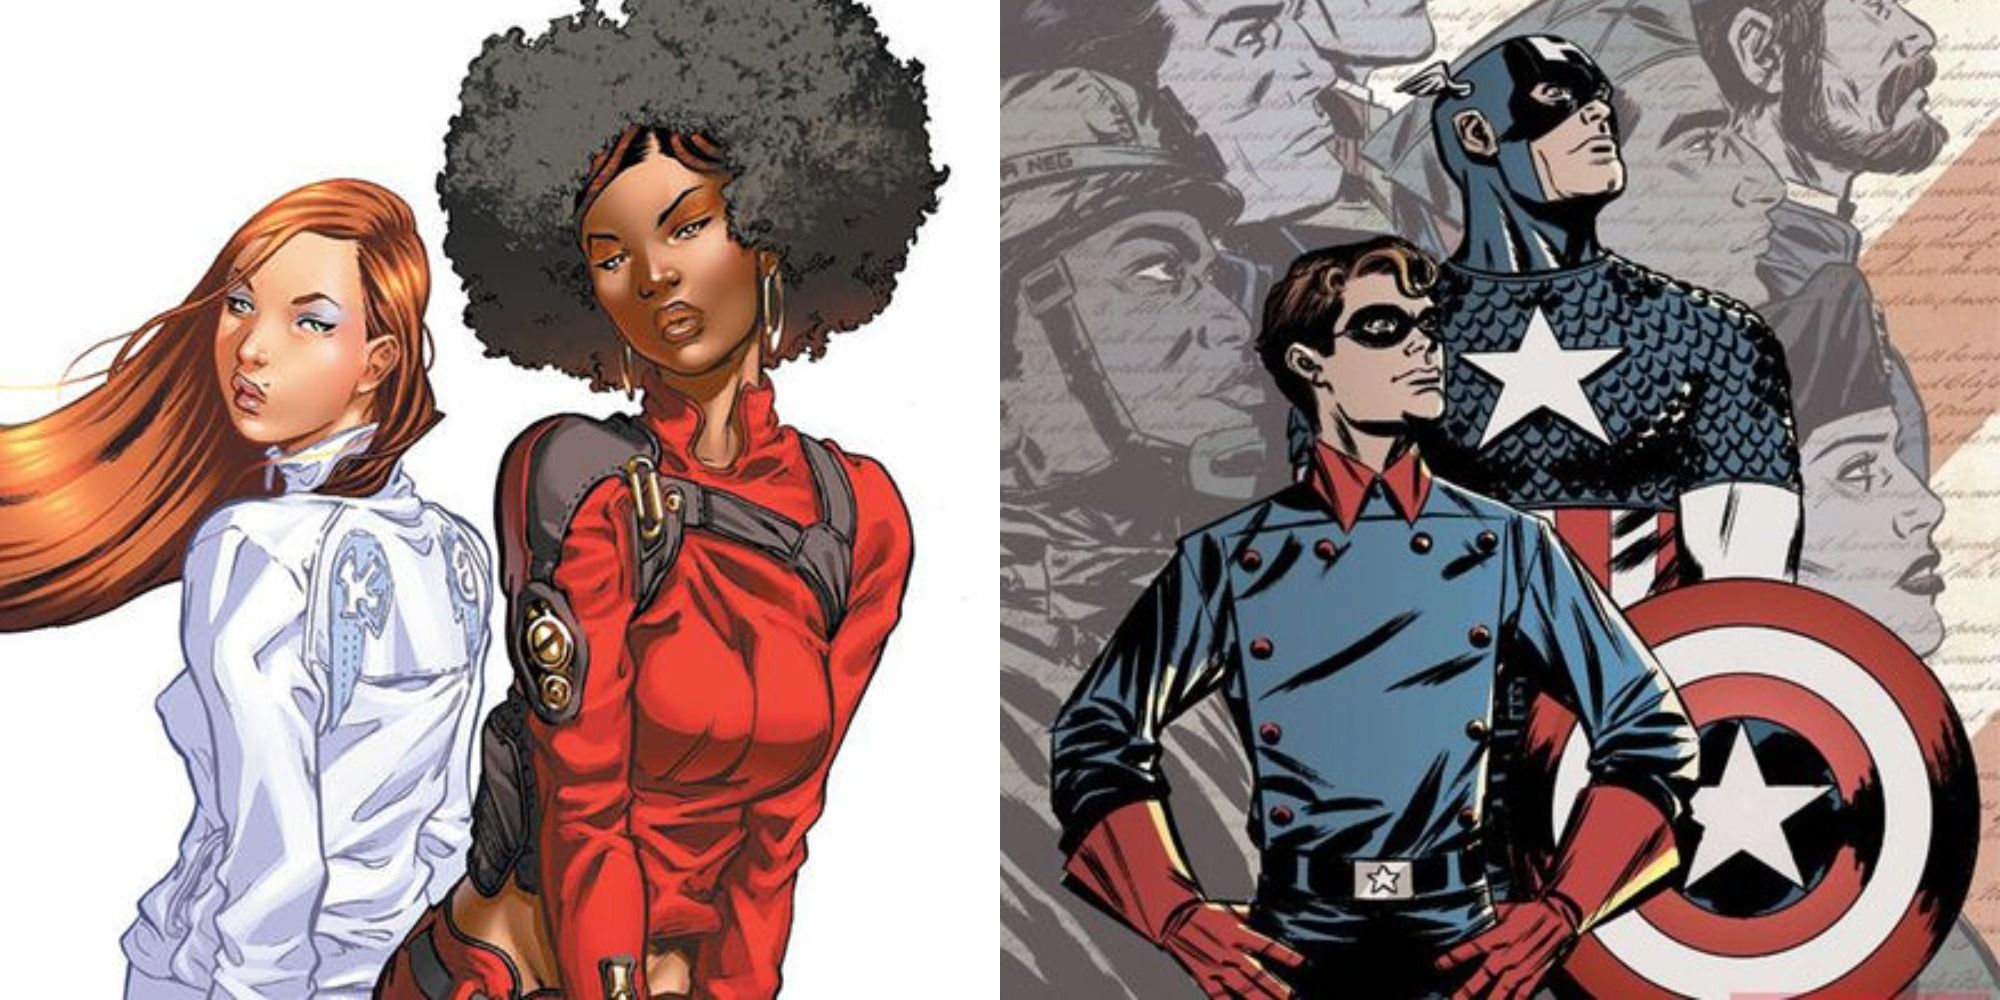 Split image showing Colleen Wing and Misty Knight, and Cap and Bucky in Marvel comics